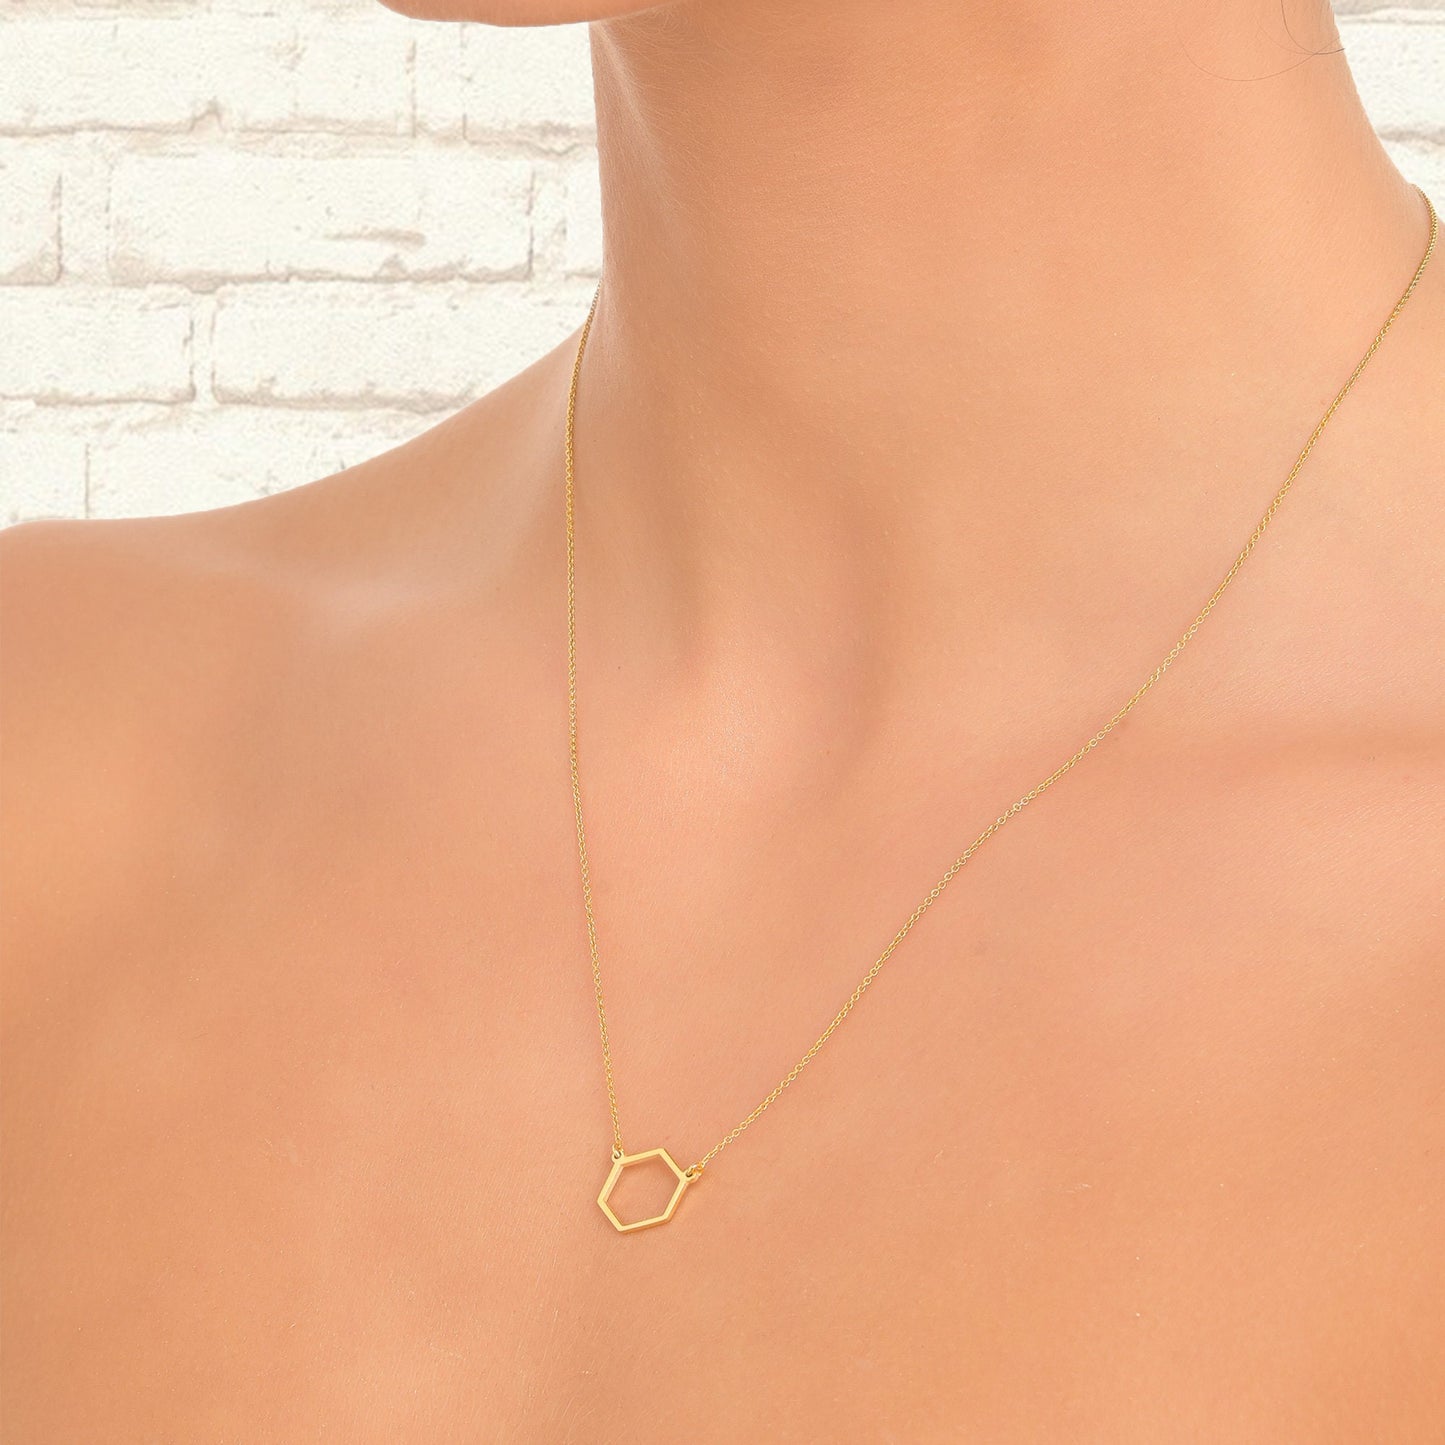 14k yellow gold Hexagon Necklace / Dainty Gold Hexagon Necklace / Geometric Necklace / Layered Necklace / 14k gold necklace layered necklace